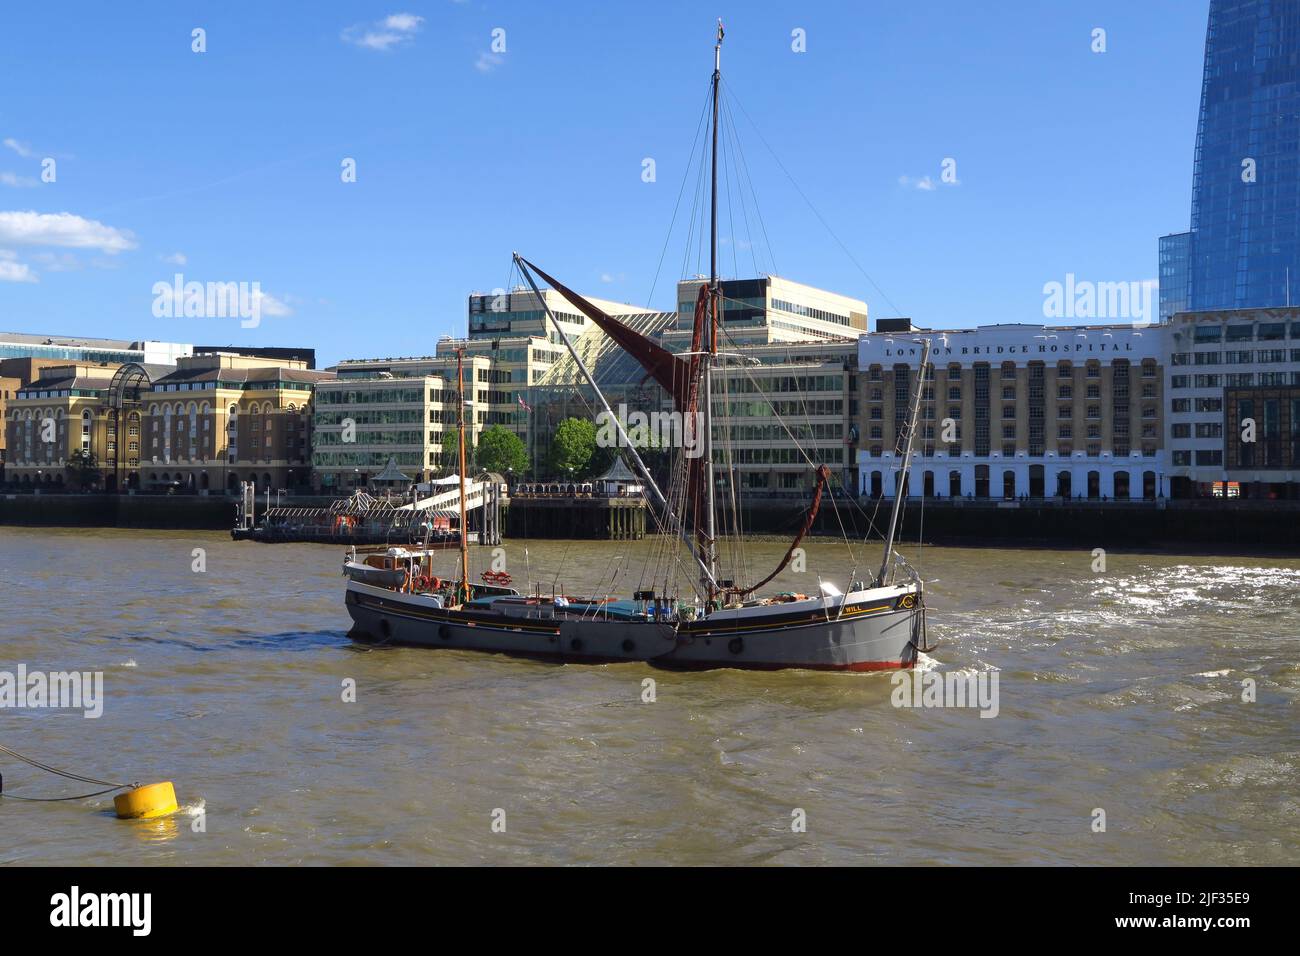 Thames sailing barge 'Will' on the River Thames near London Bridge Hospital. The vessel is one of the largest of its type. Stock Photo